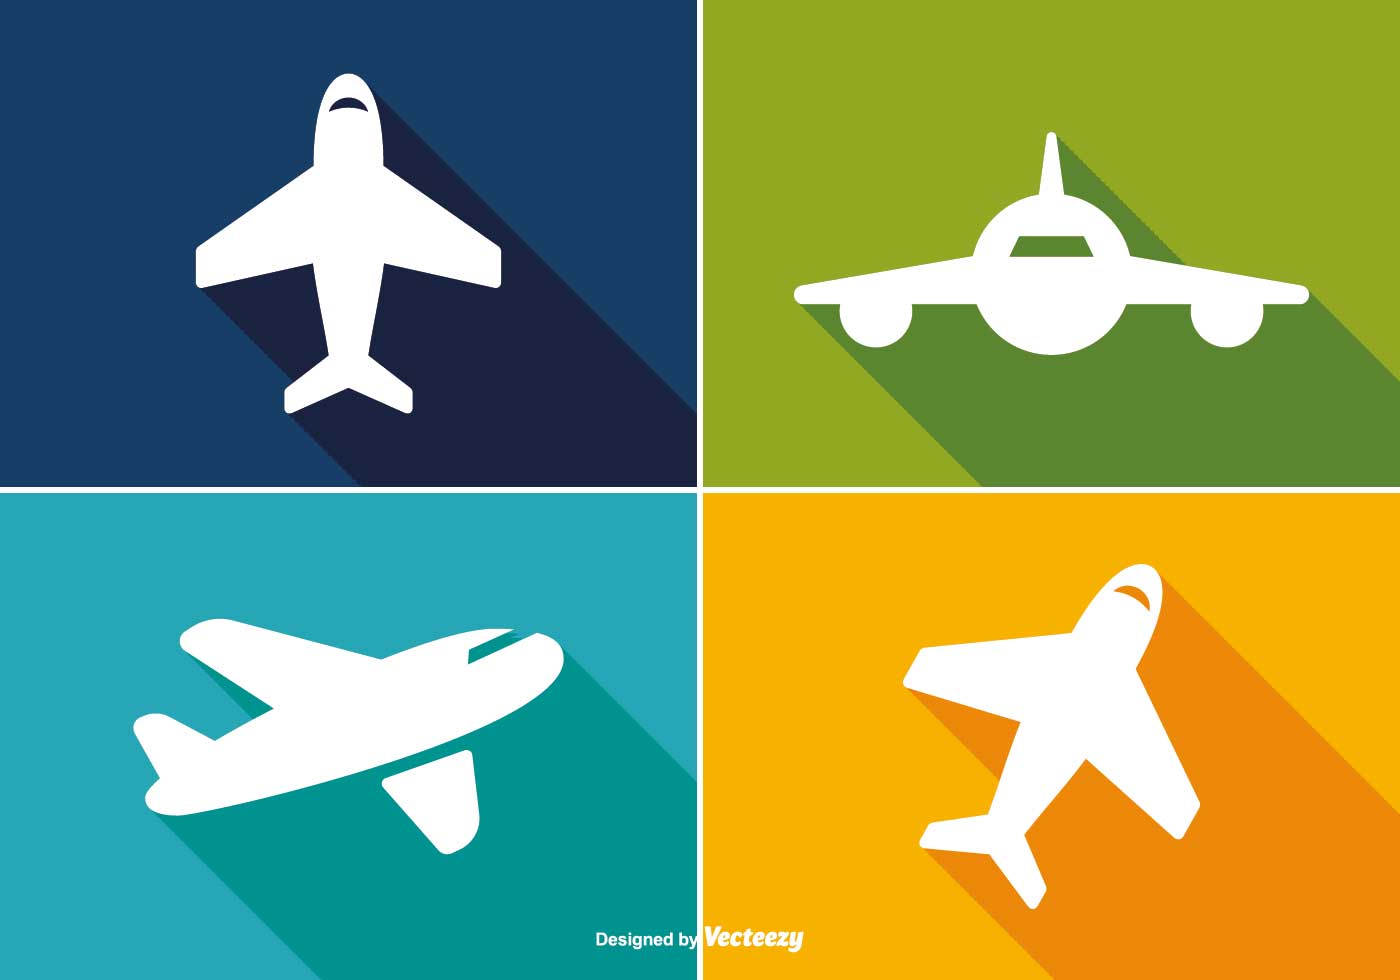 Airplane Free Vector Art - (4515 Free Downloads)